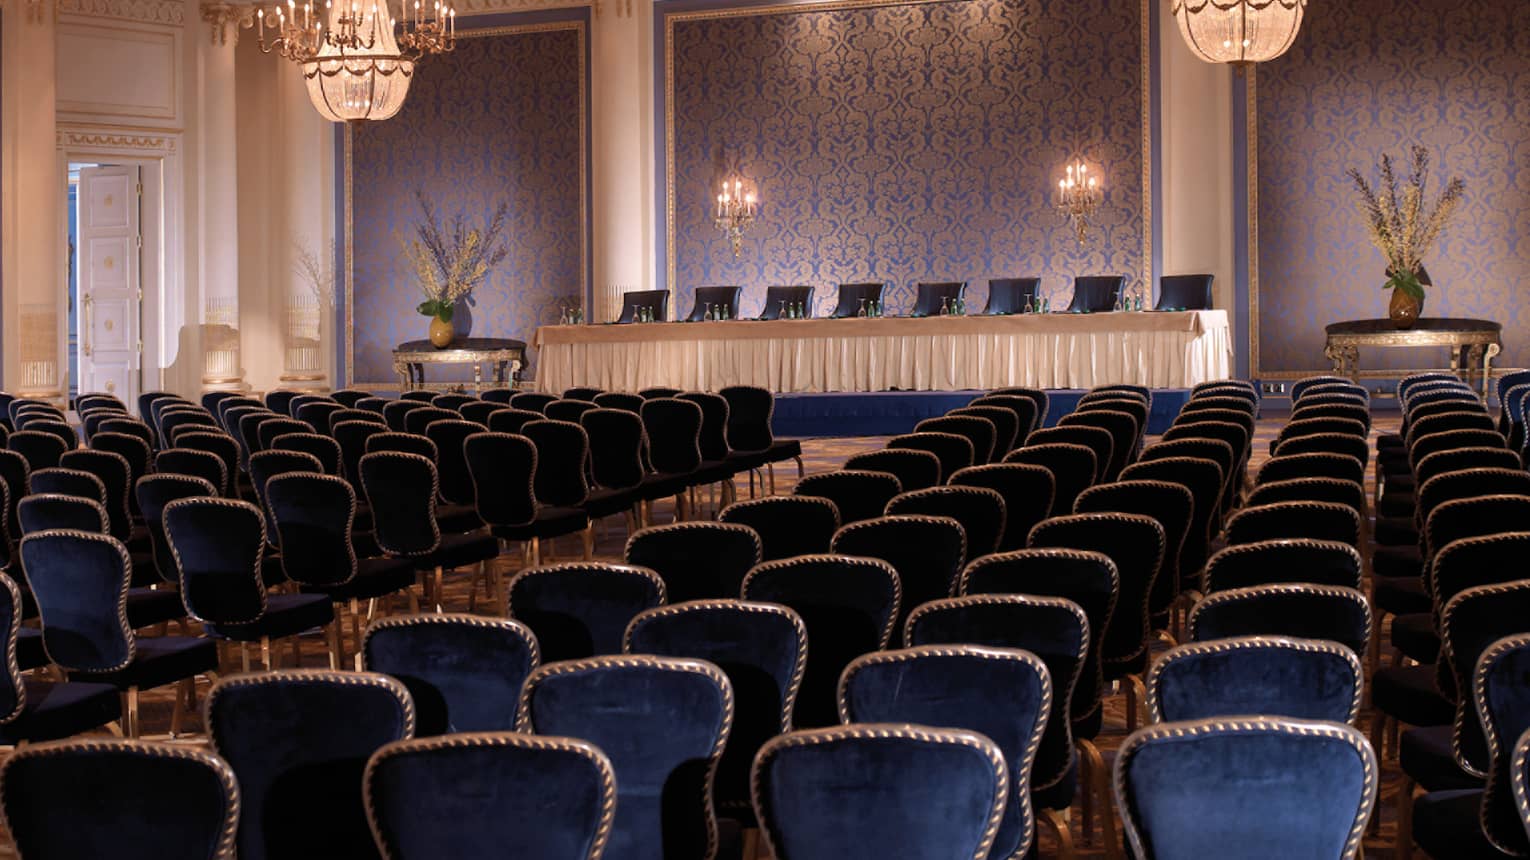 Ballroom with royal blue chairs in rows facing podium with table, textured blue panels, chandeliers 